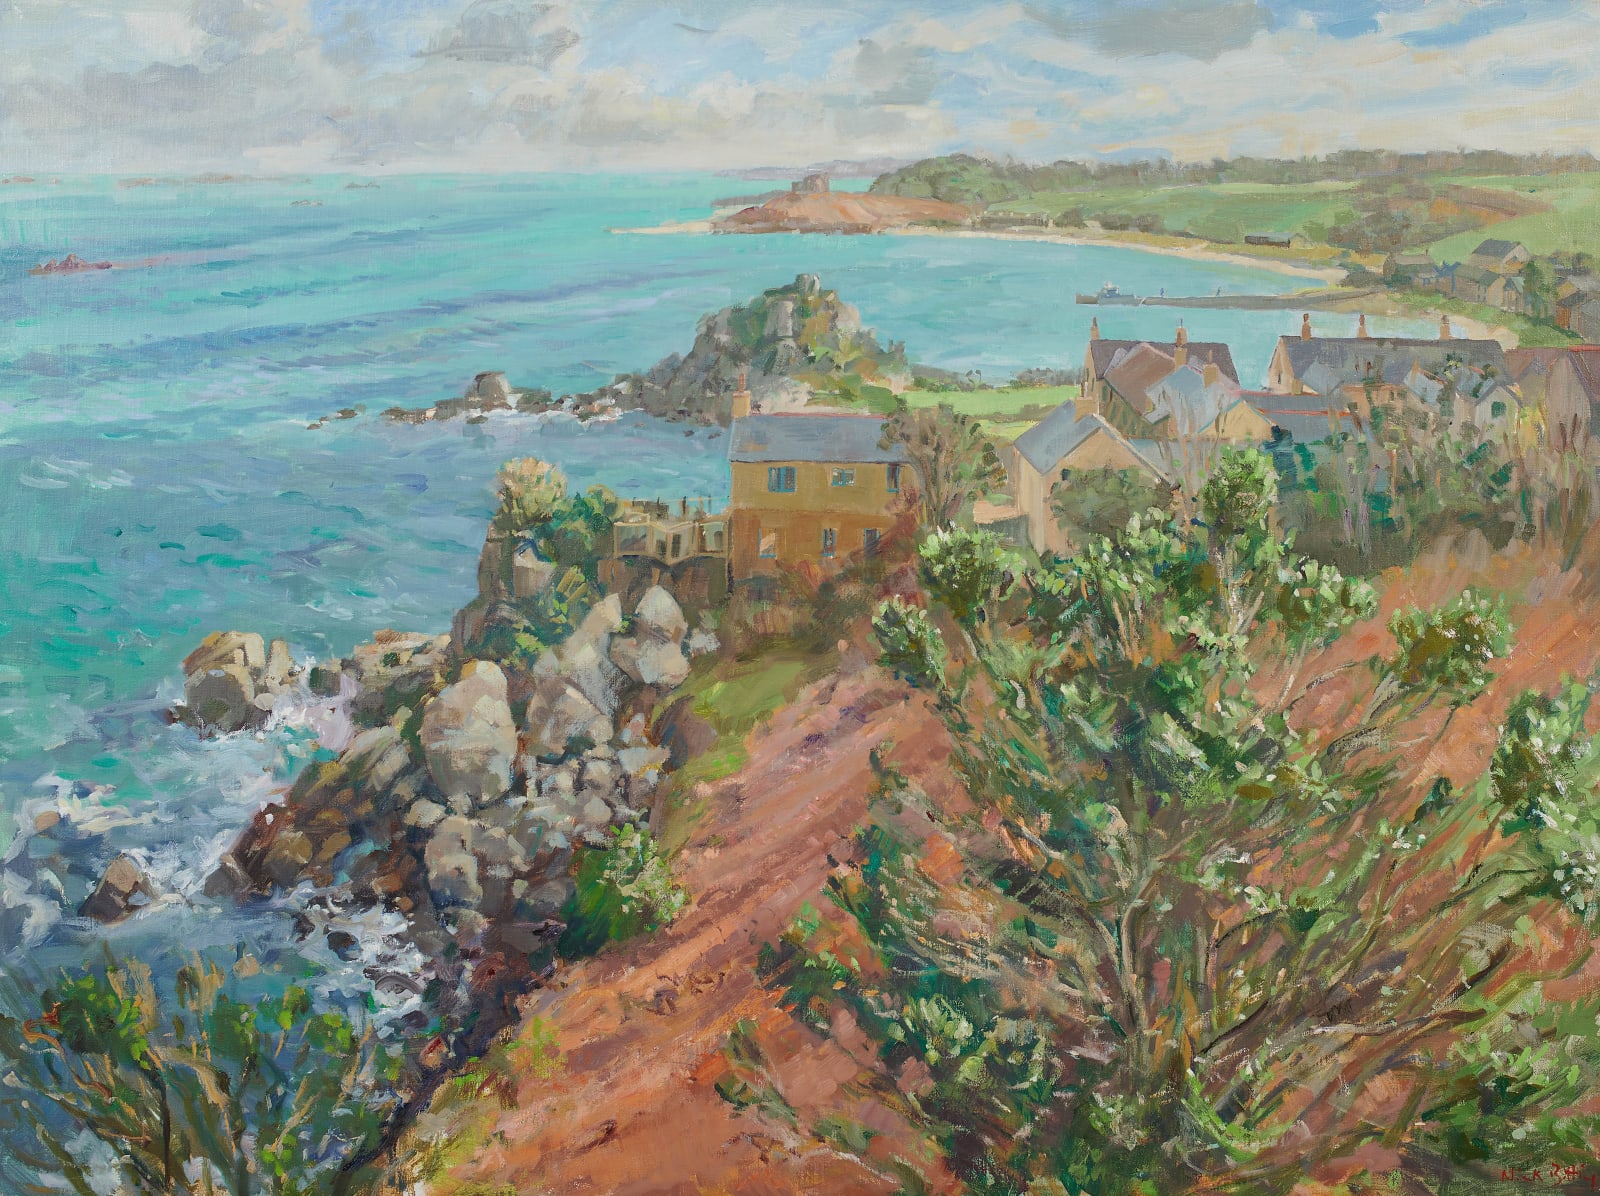 Nick Botting, 1. The Scillies, Wind, Sun and Sea